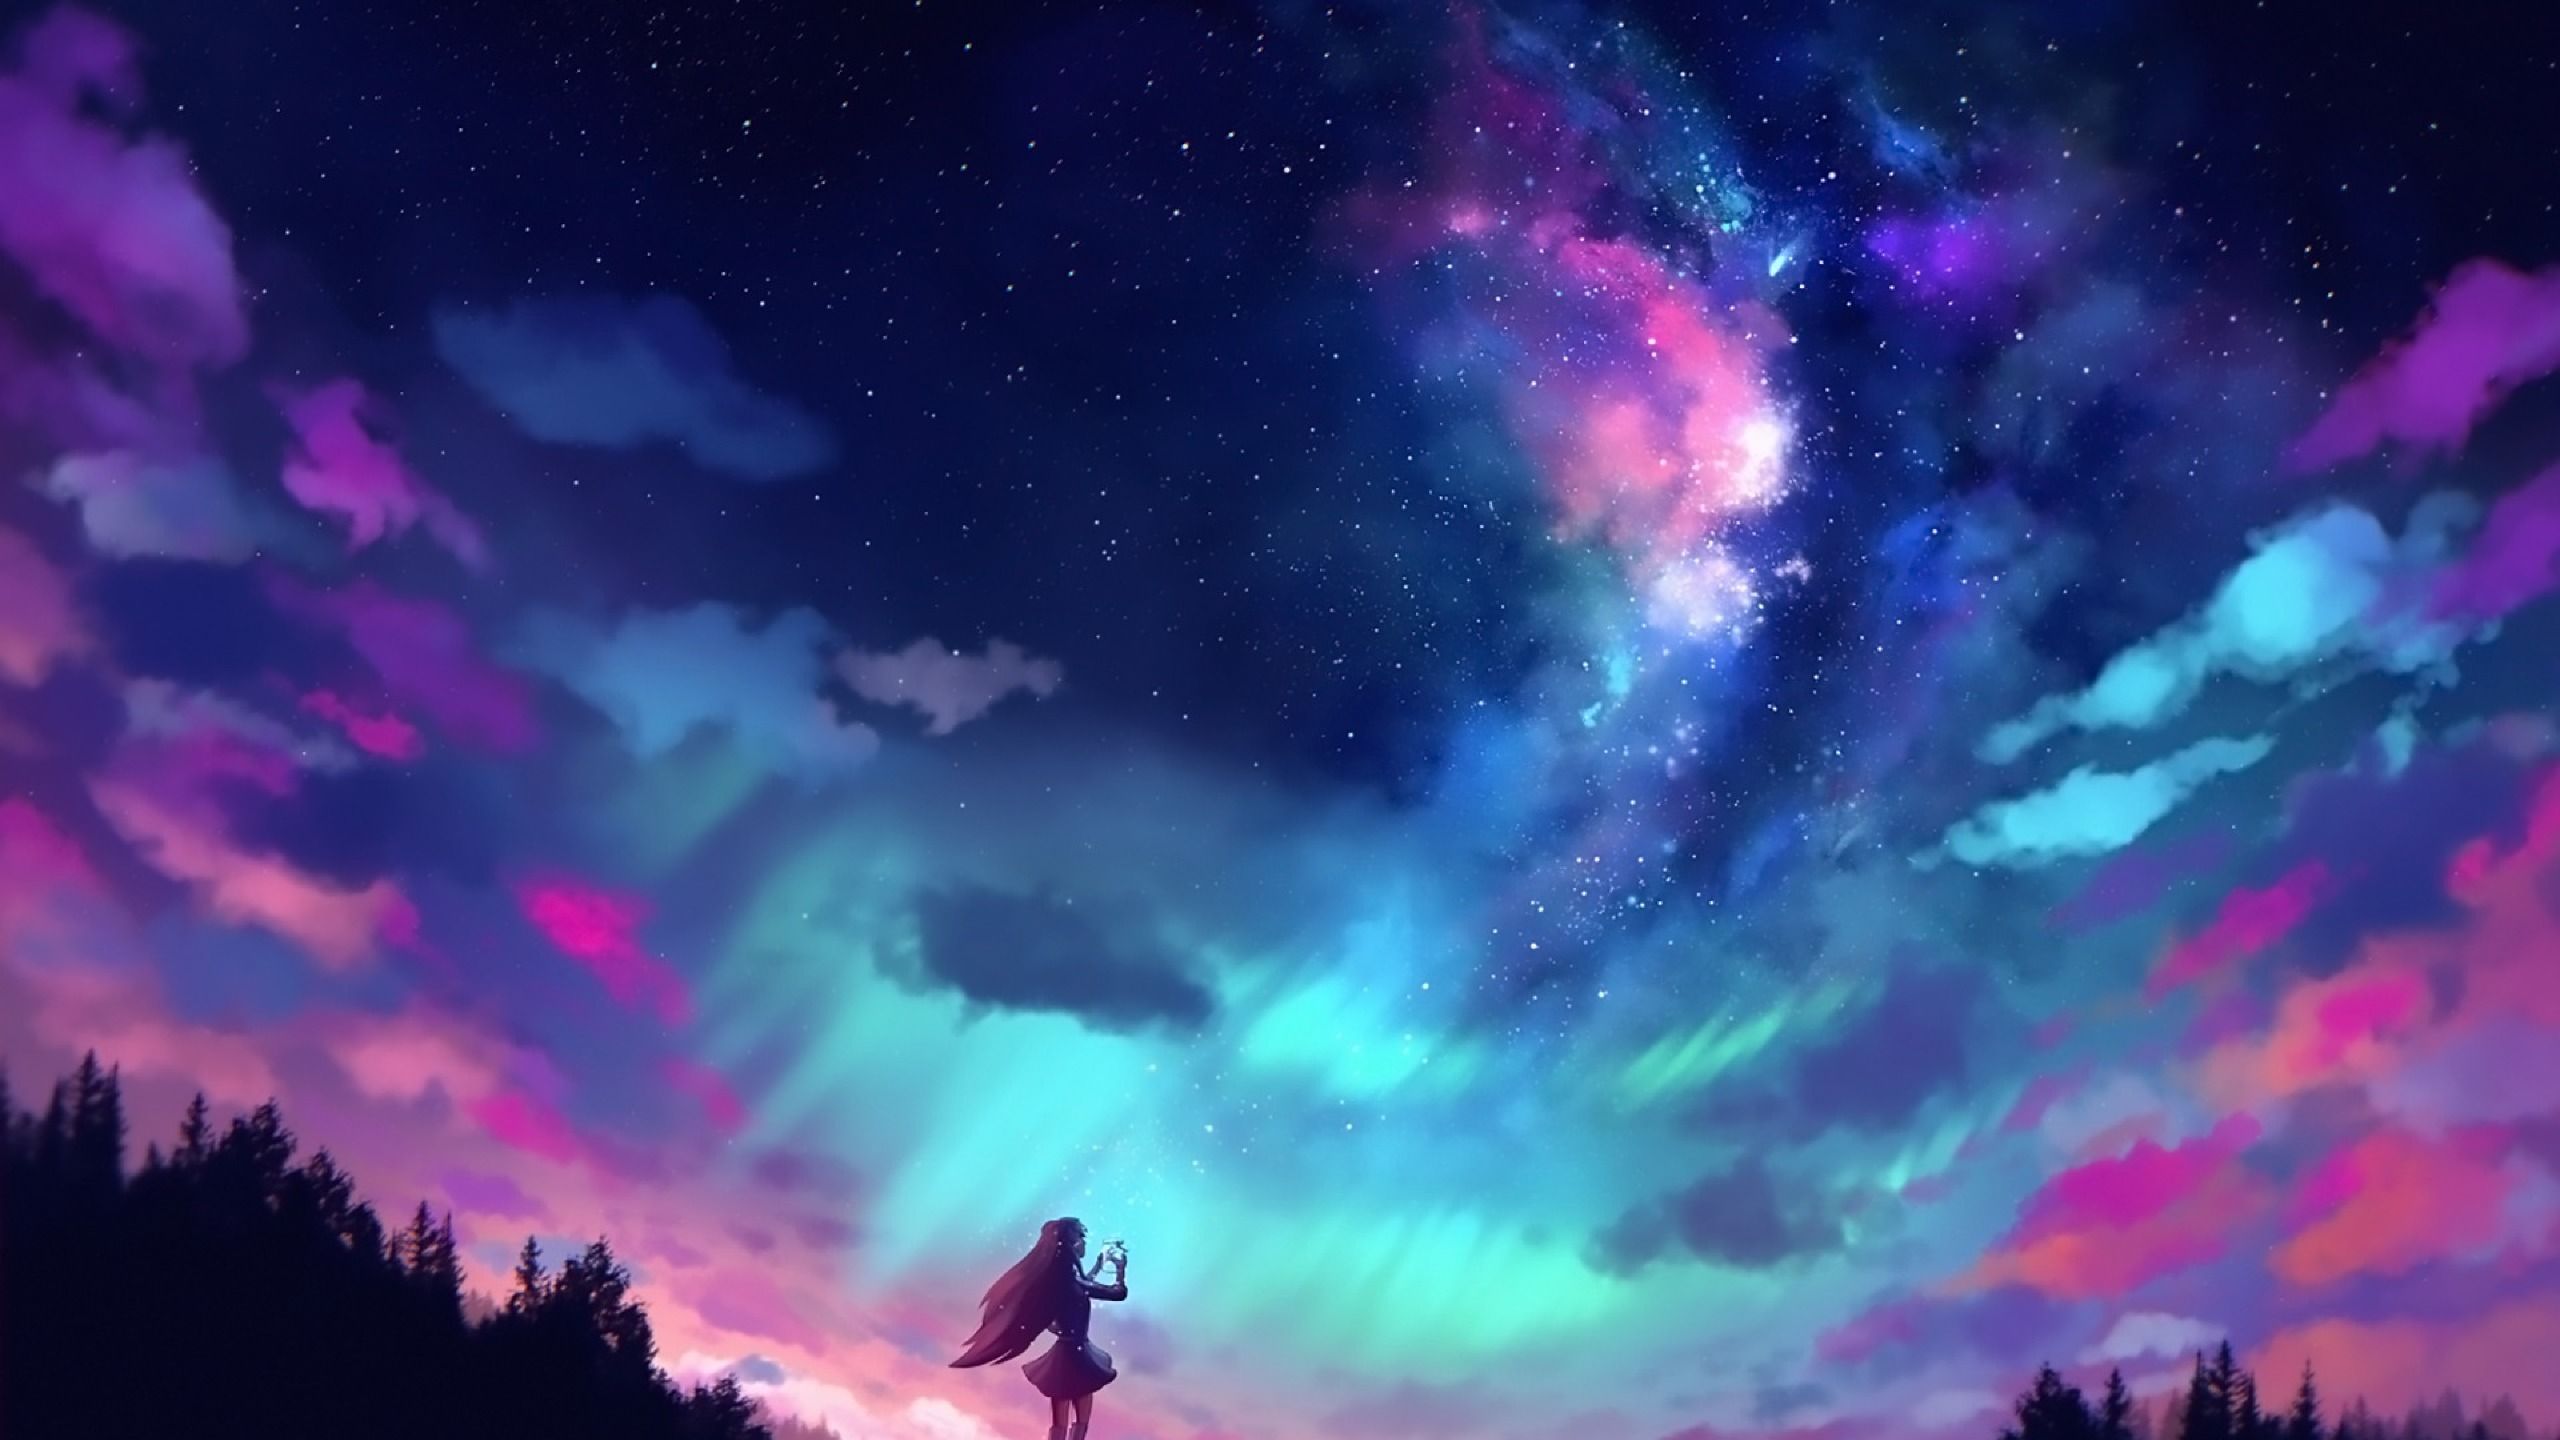 Anime Girl And Colorful Sky 1440P Resolution Wallpaper, HD Anime 4K Wallpaper, Image, Photo and Background